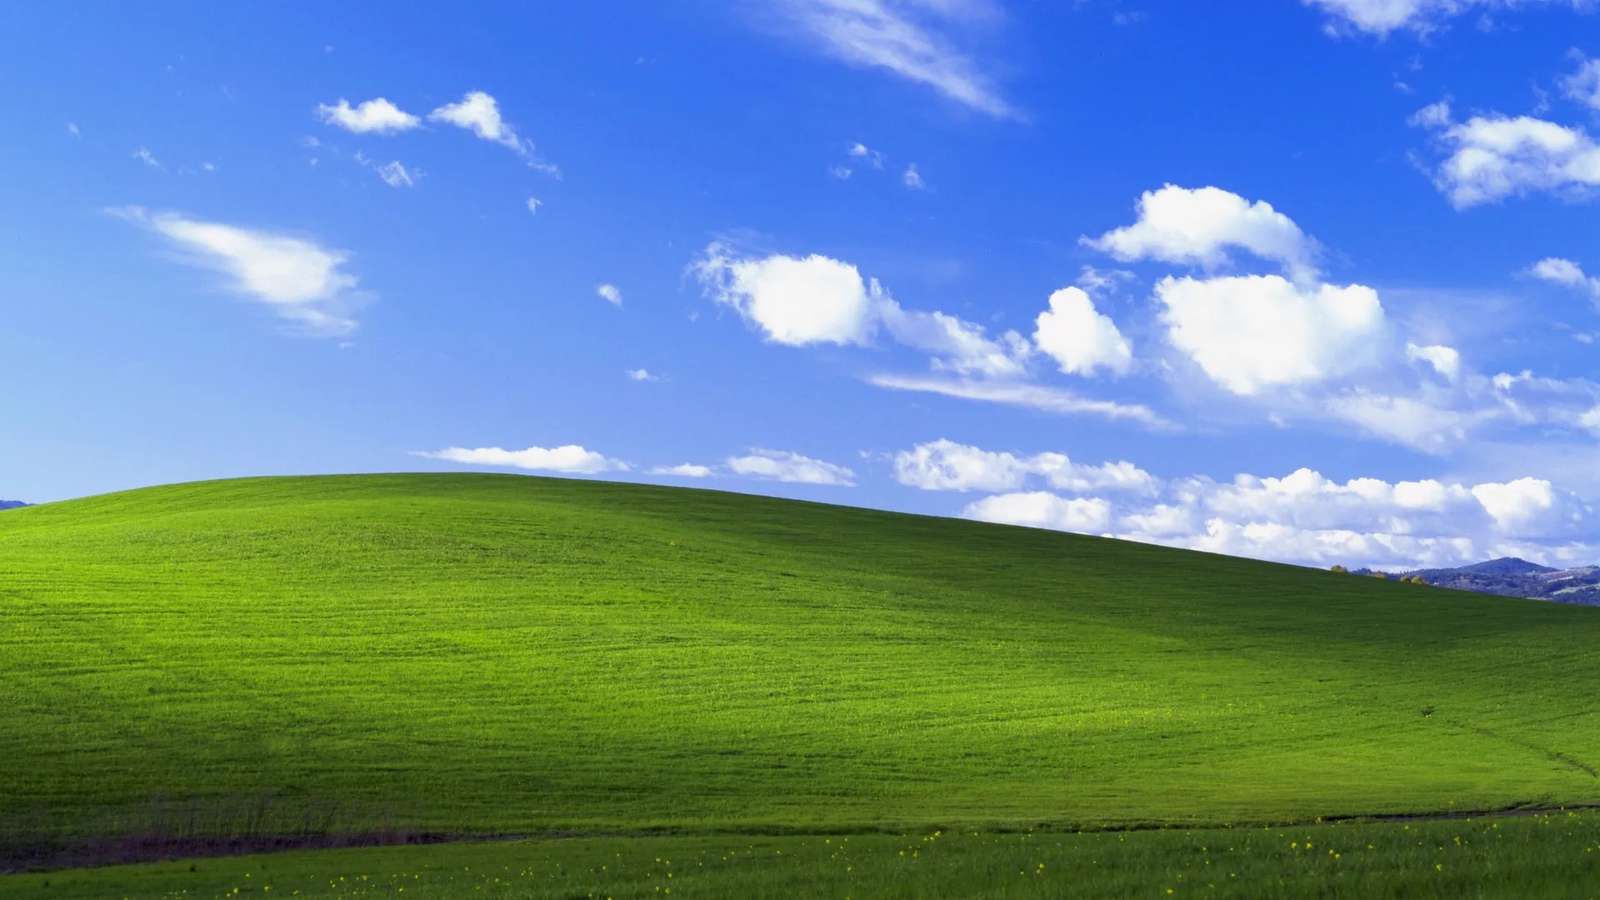 Windows XP for Bliss Wallpaper puzzle online from photo